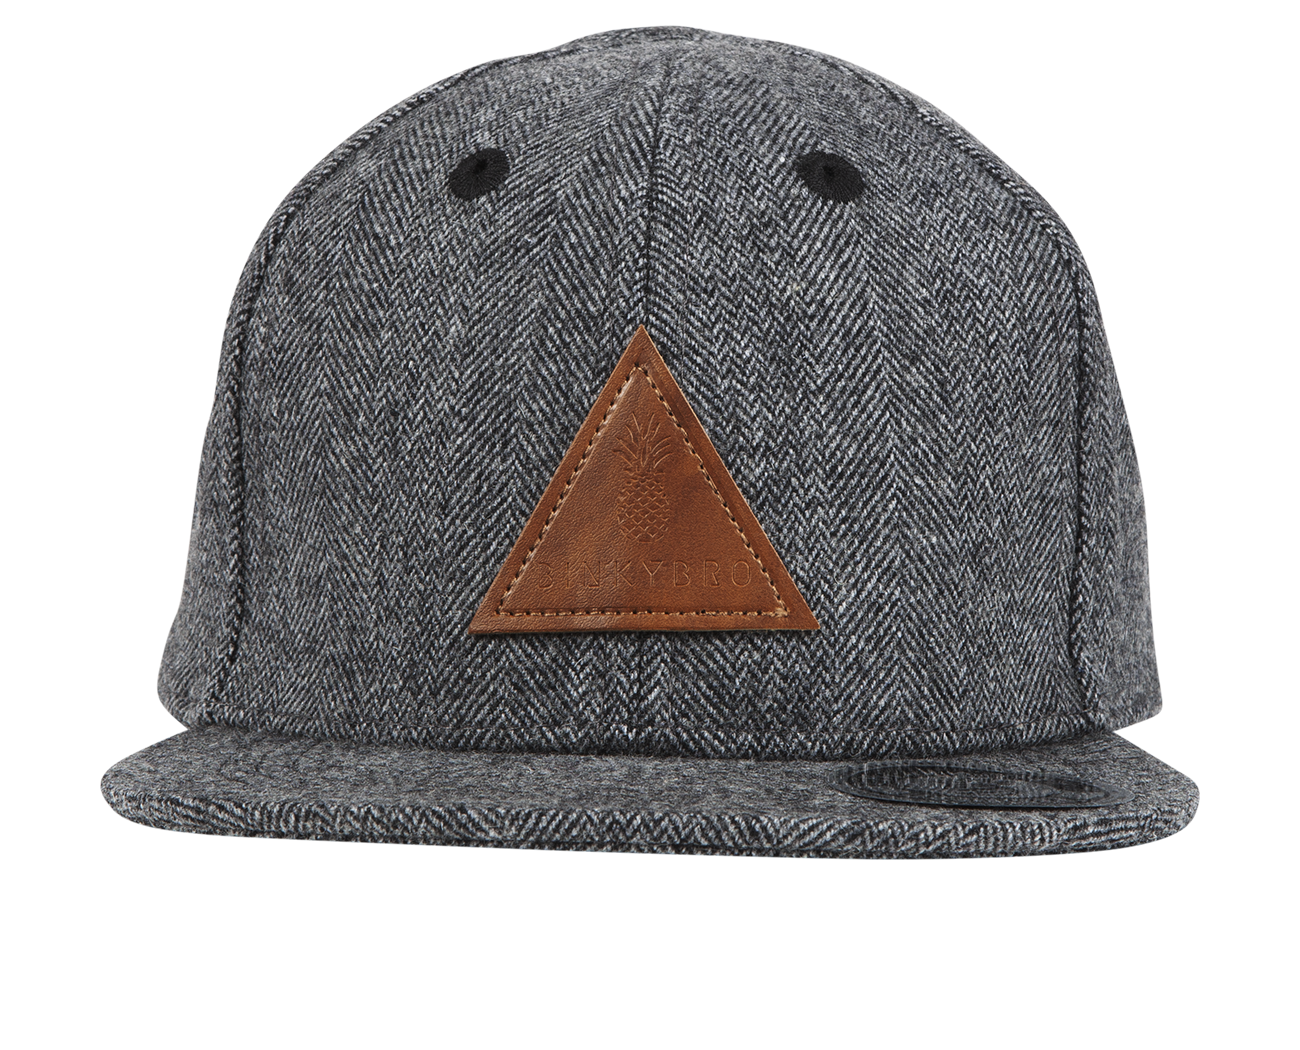 Bonzai hat: Toddler (12 months - 3 years) / charcoal / Standard Fit